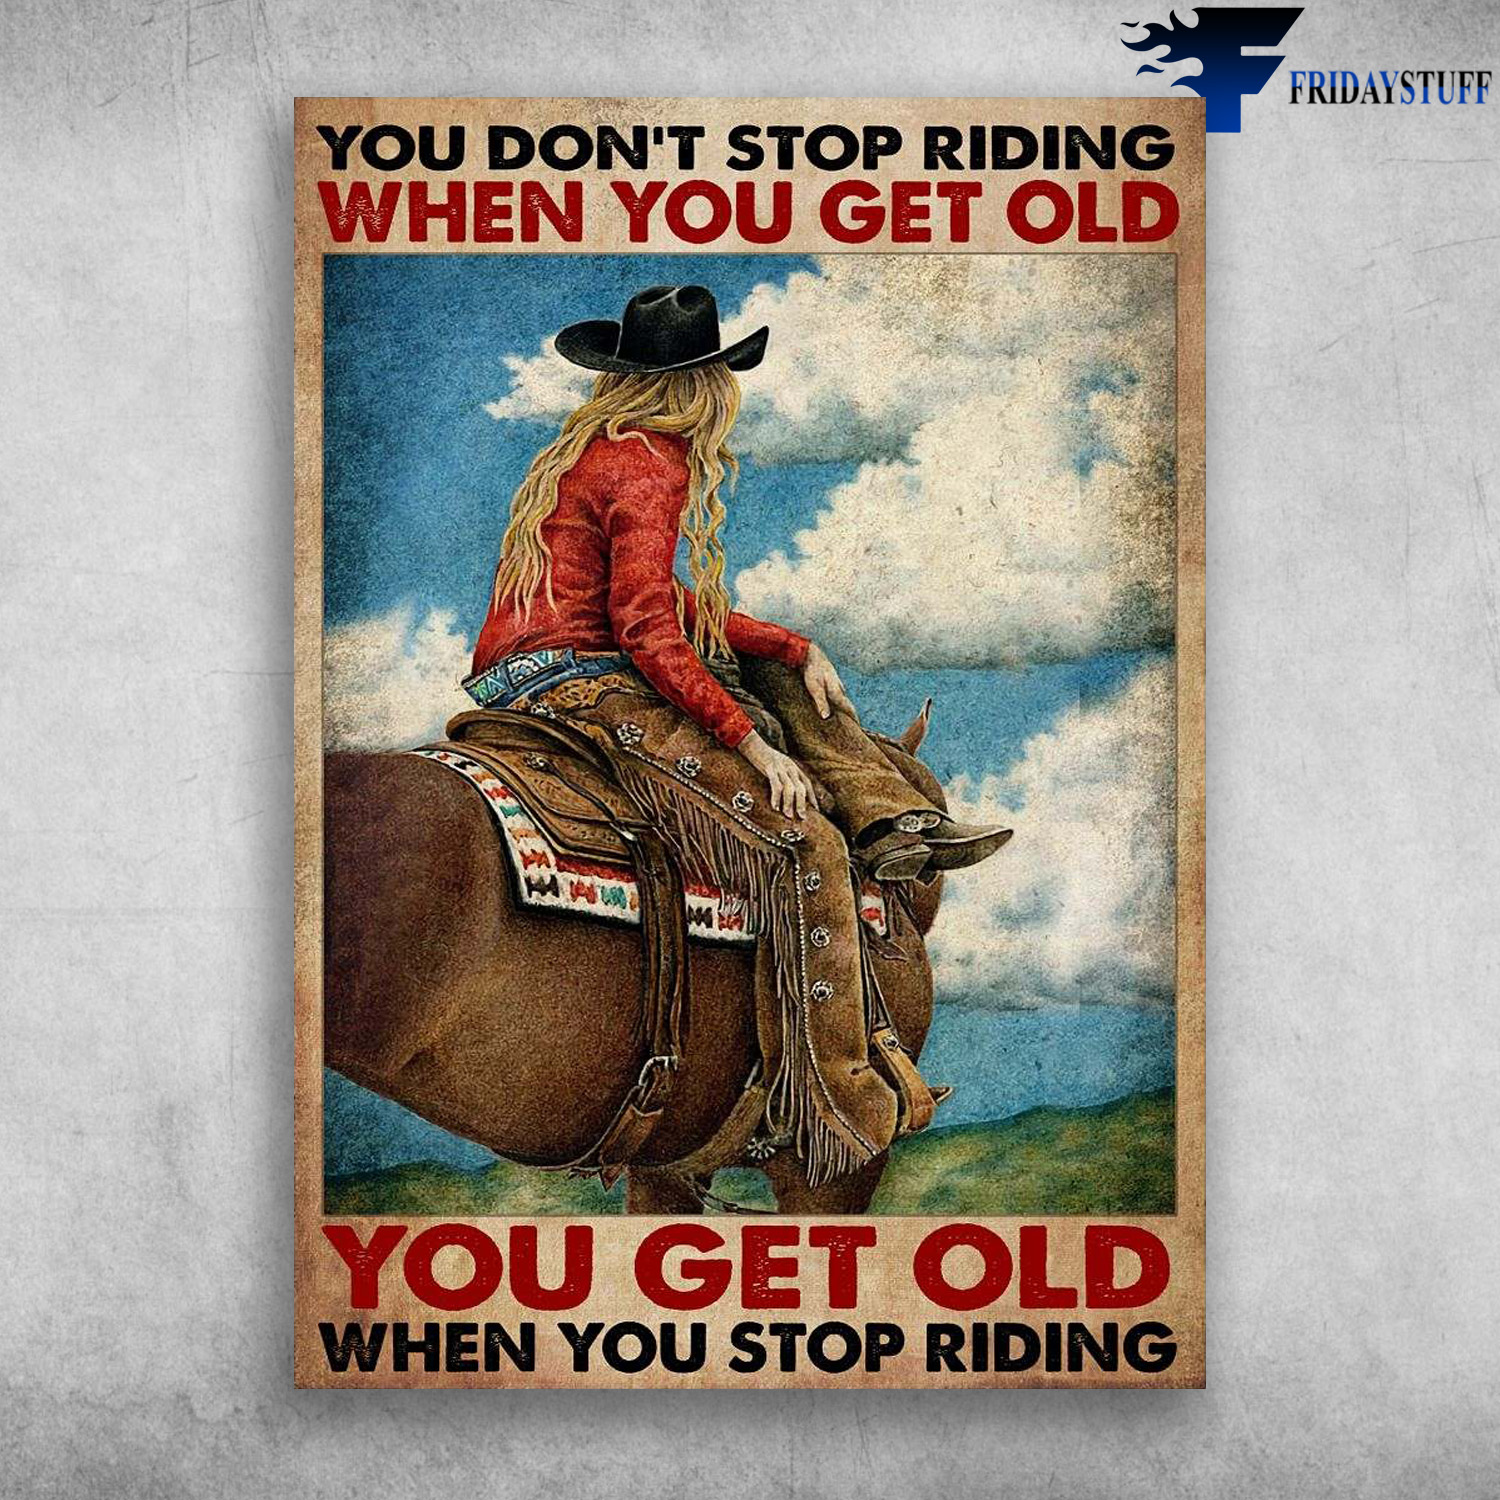 Cowgirl Riding Horse - You Don't Stop Riding When You Get Old, You Get Old When You Stop Riding